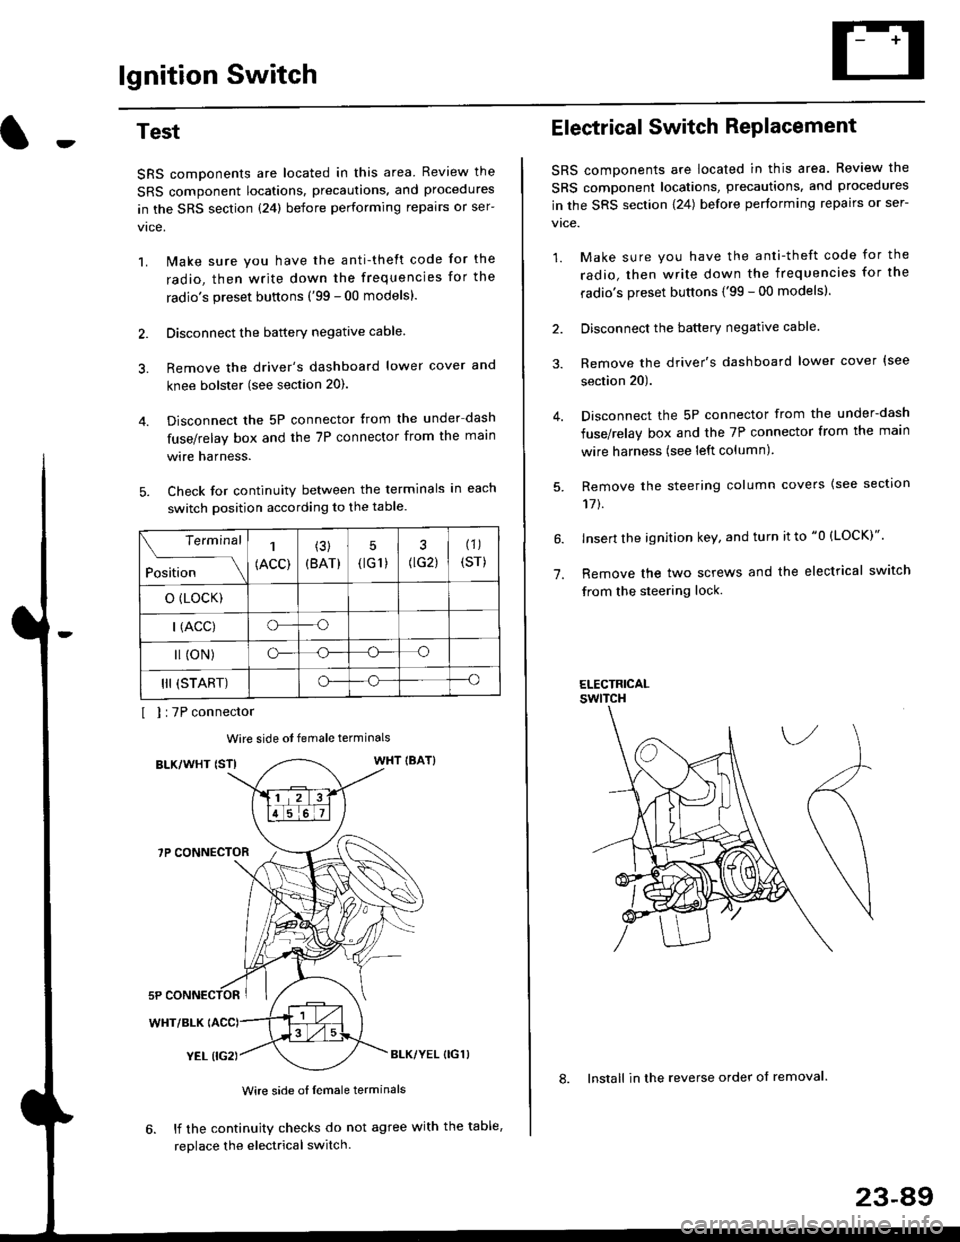 HONDA CIVIC 1996 6.G Workshop Manual lgnition Switch
4.
Test
SRS components are located in this area Review the
SRS component locations. precautions. and procedures
in the SRS section {24} before performing repairs or ser-
1. i/ake sure 